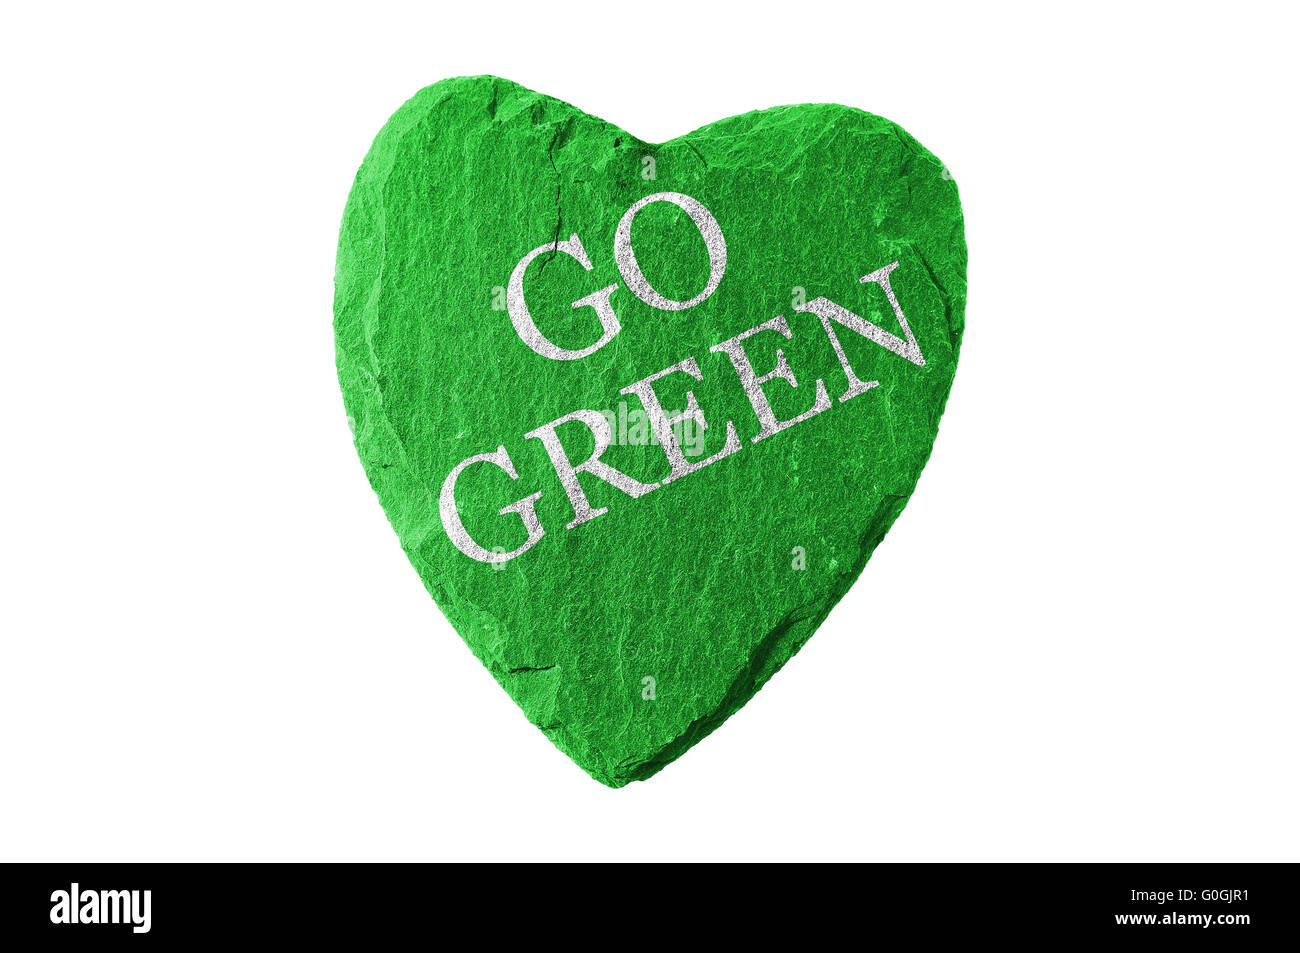 green heart wit go green writing Stock Photo